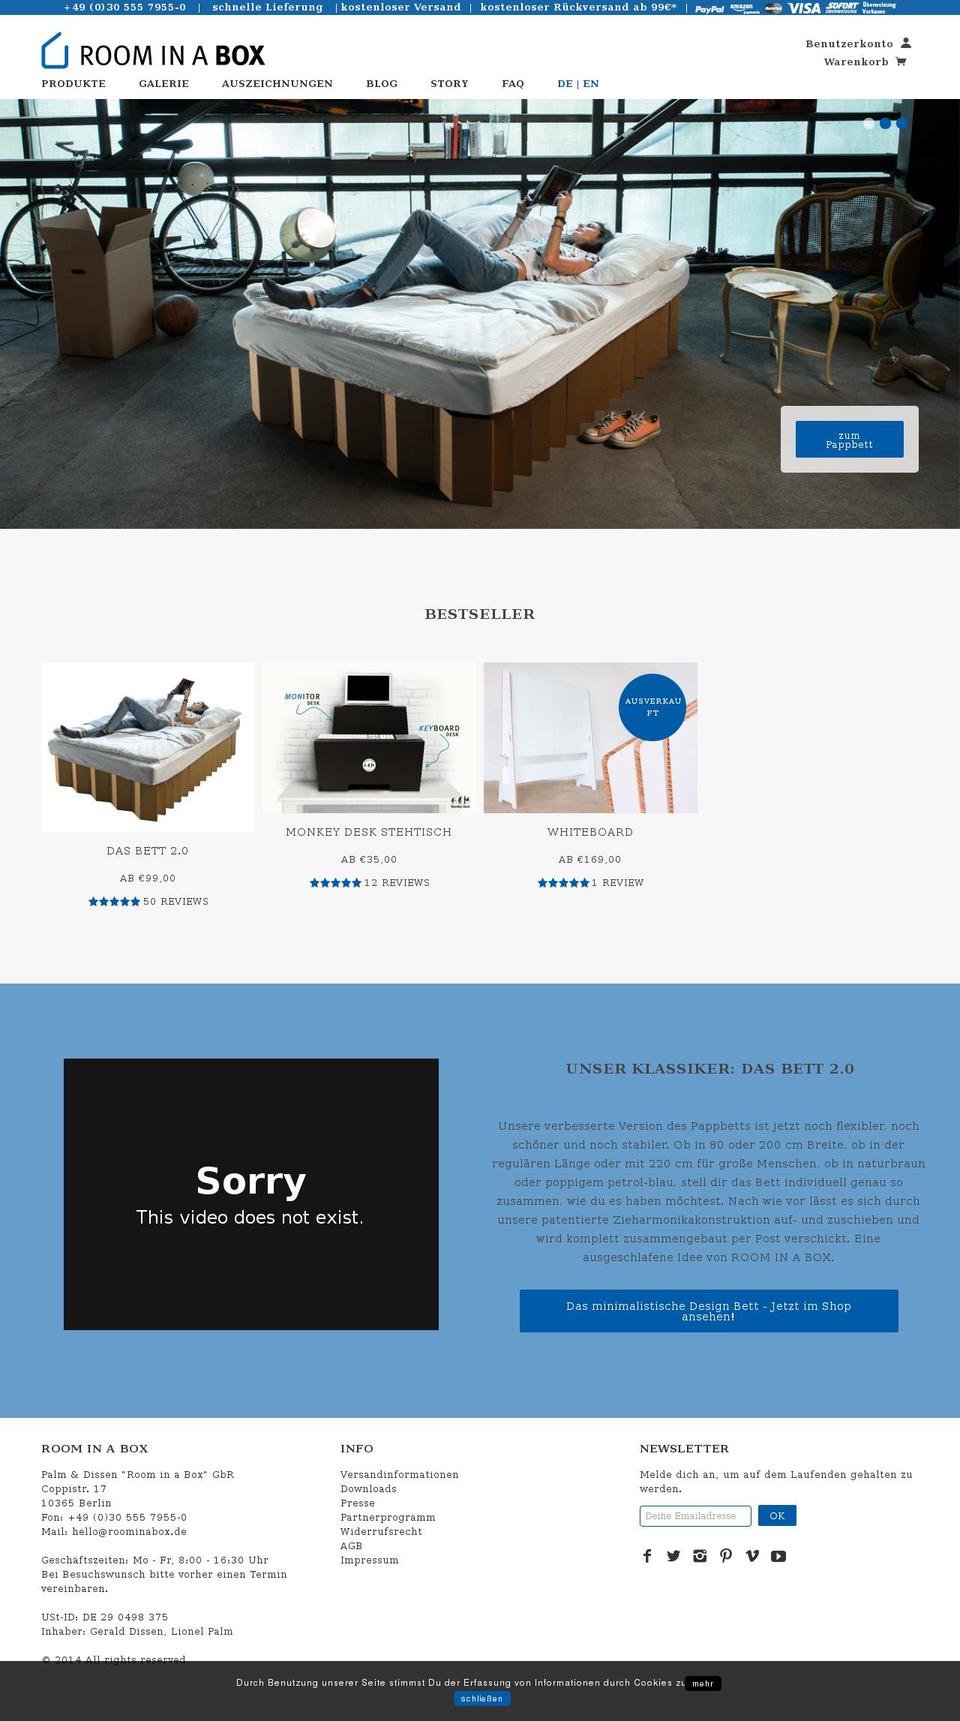 Running 10.3.2015 (language sw + blaues Banner) Shopify theme site example room-in-a-box.de